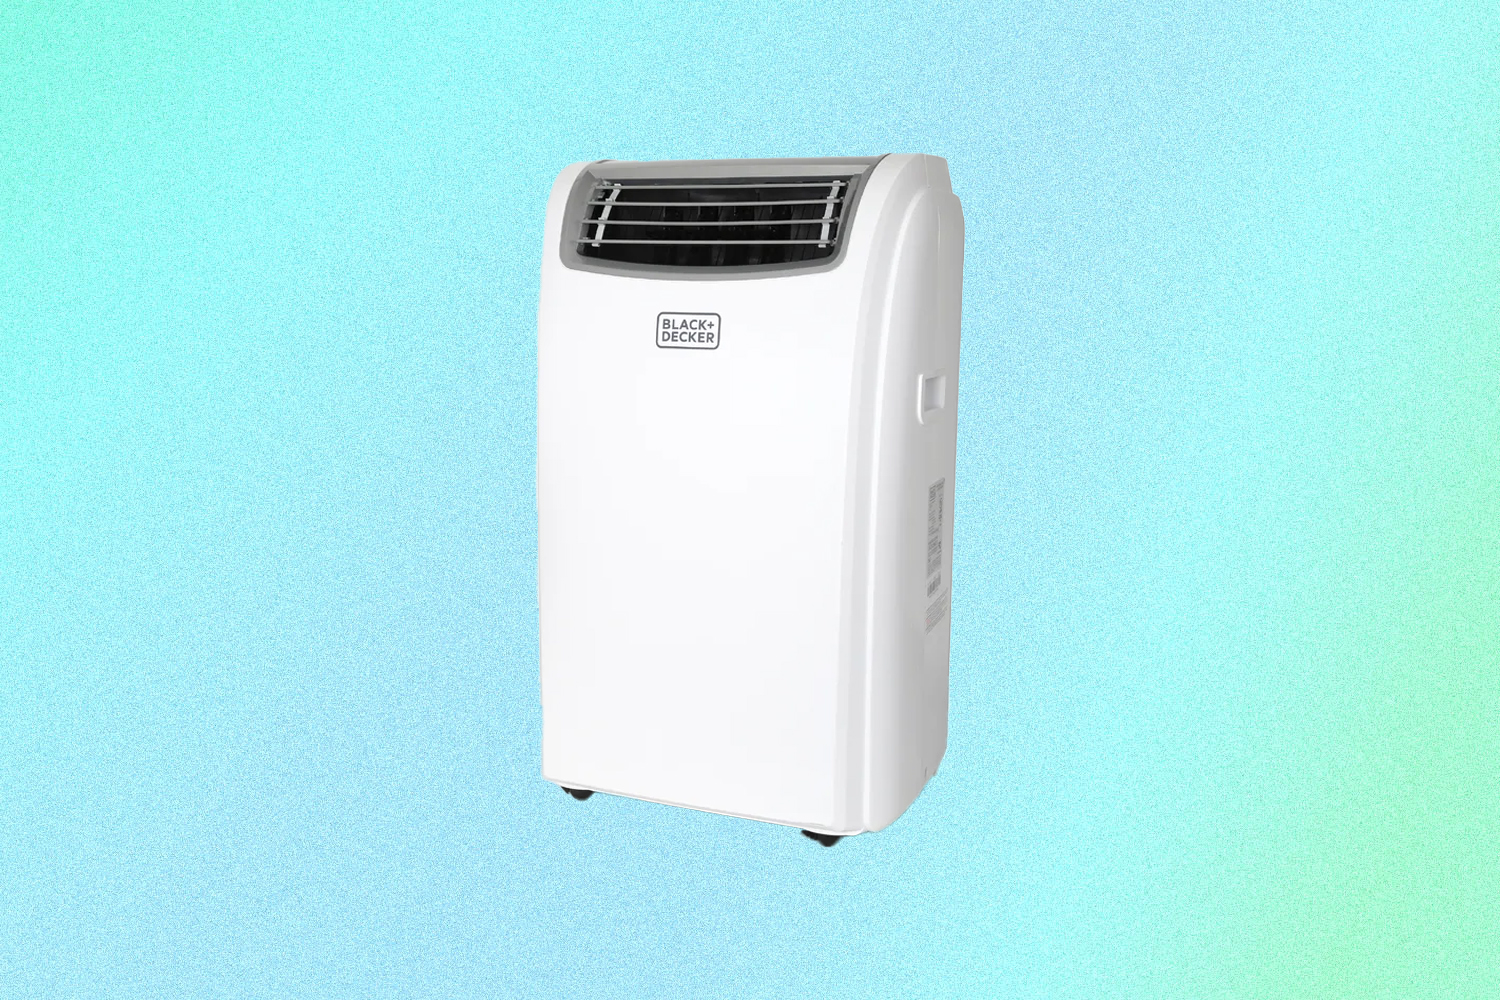 Black and Decker Portable Air Conditioner at the Wayfair way day sale